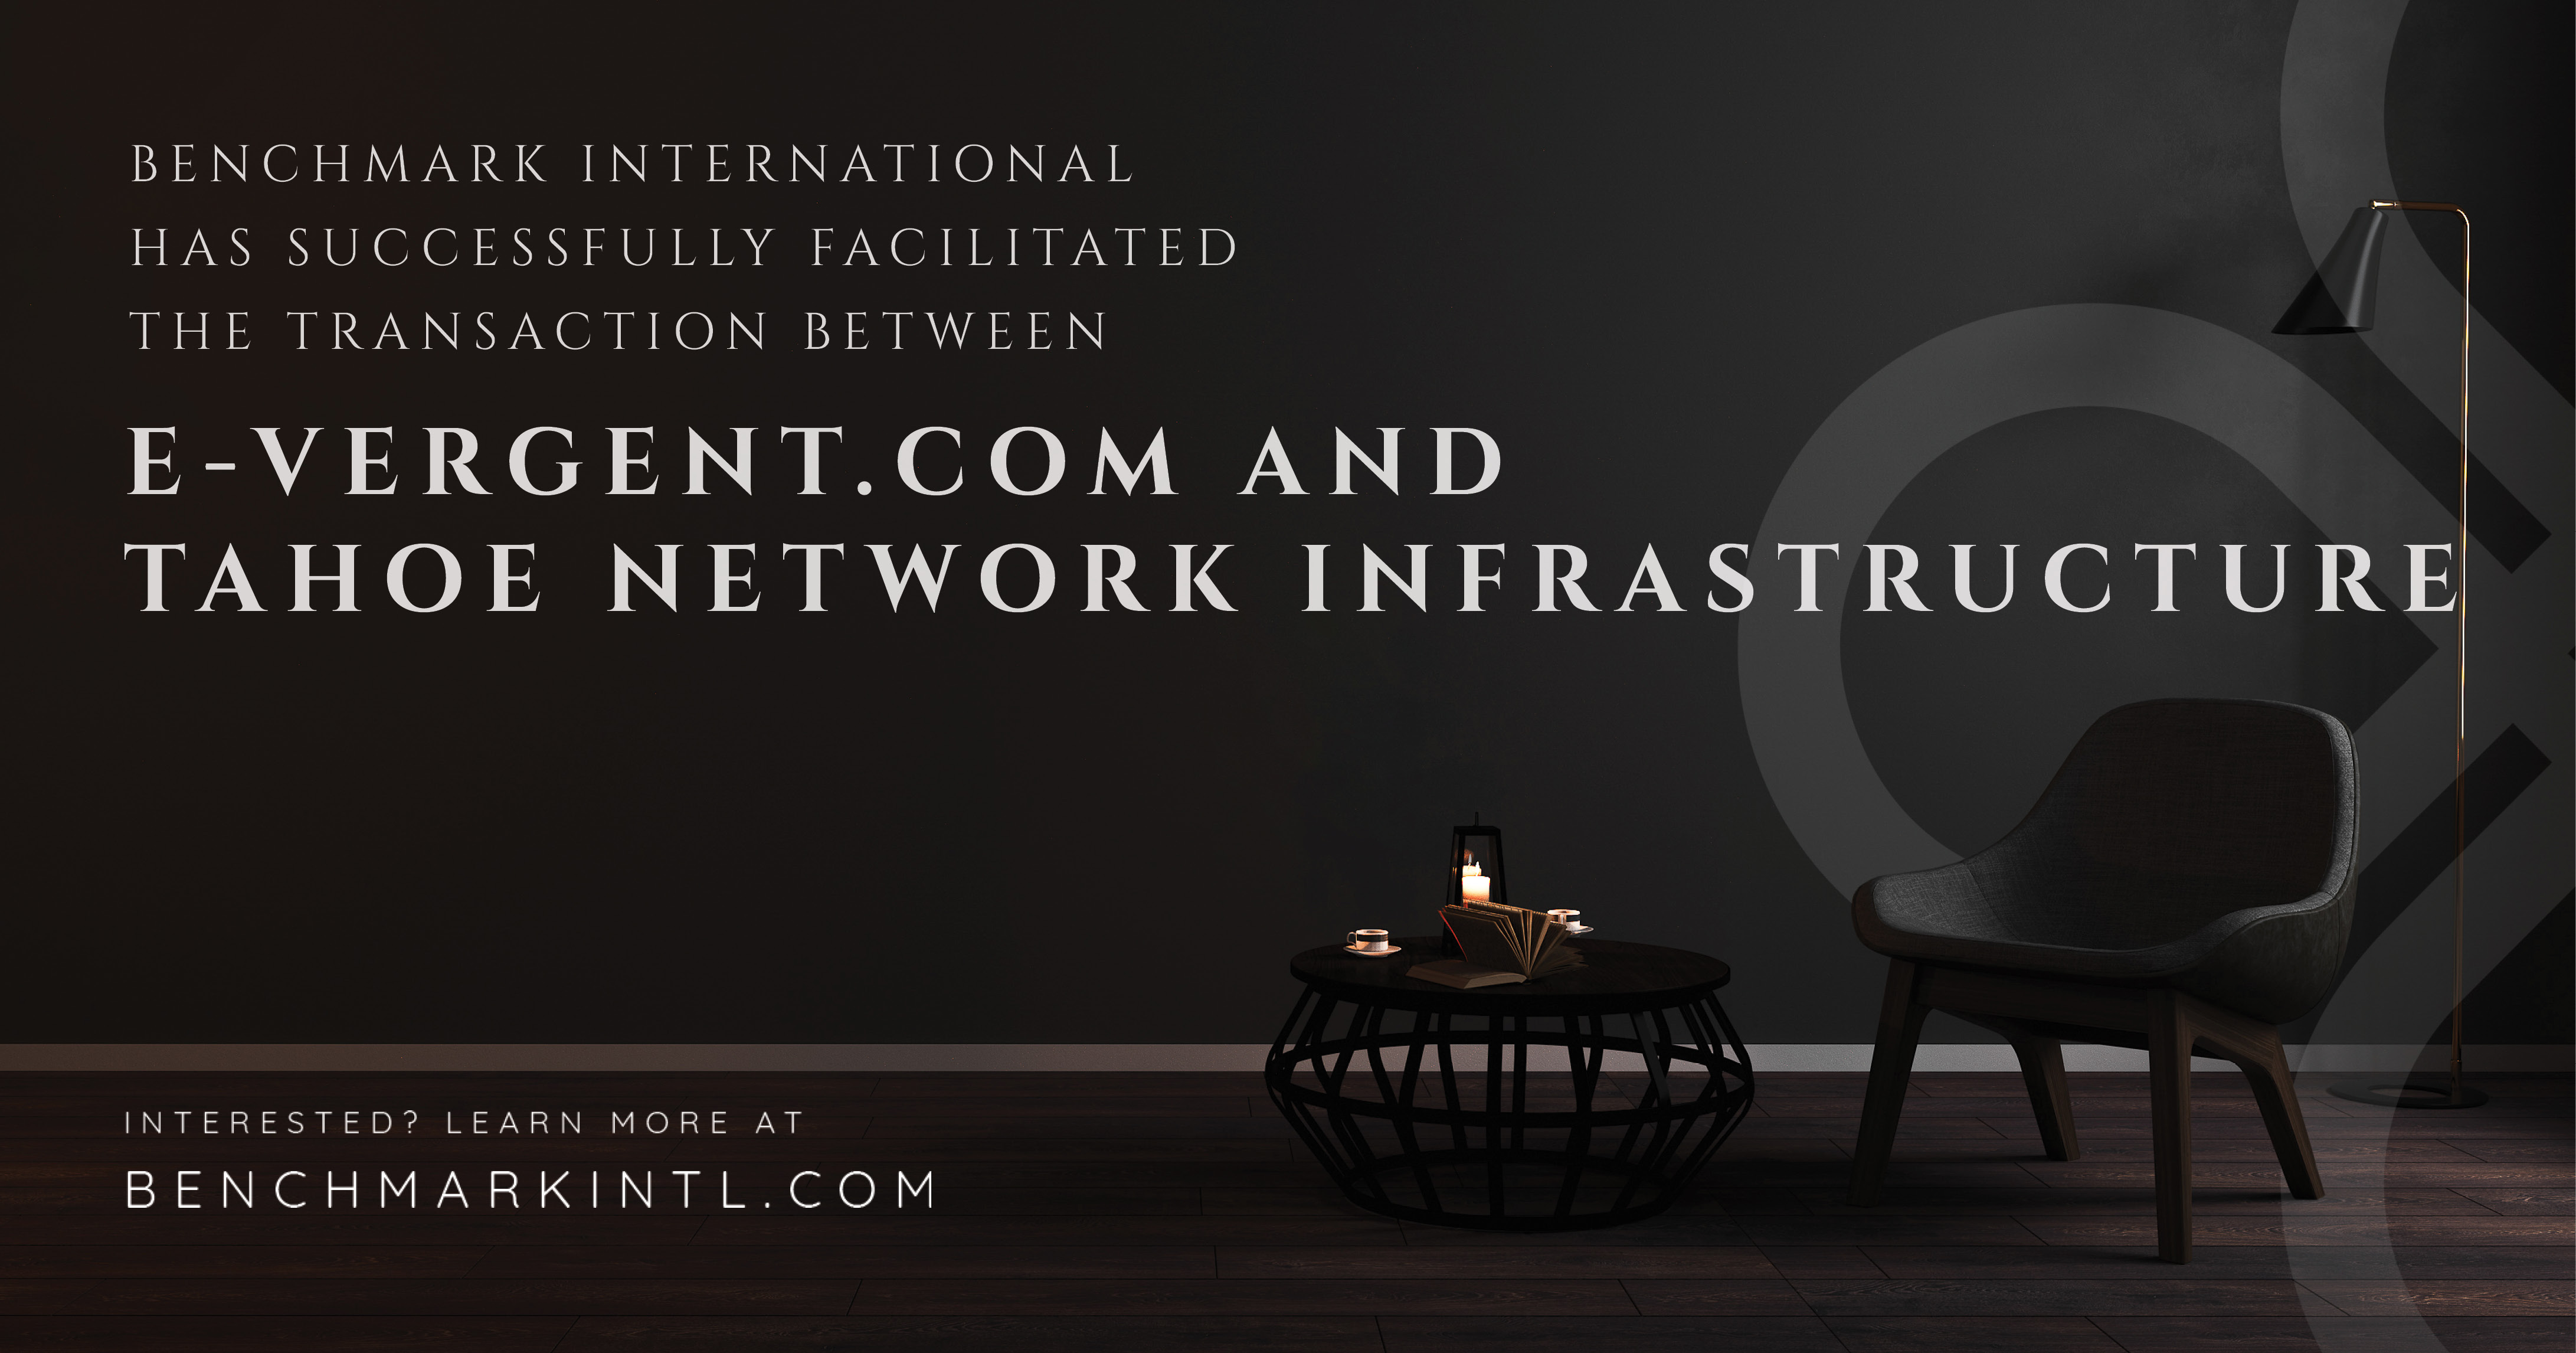 Benchmark International Facilitated The Transaction Of E-vergent.com To Tahoe Network Infrastructure